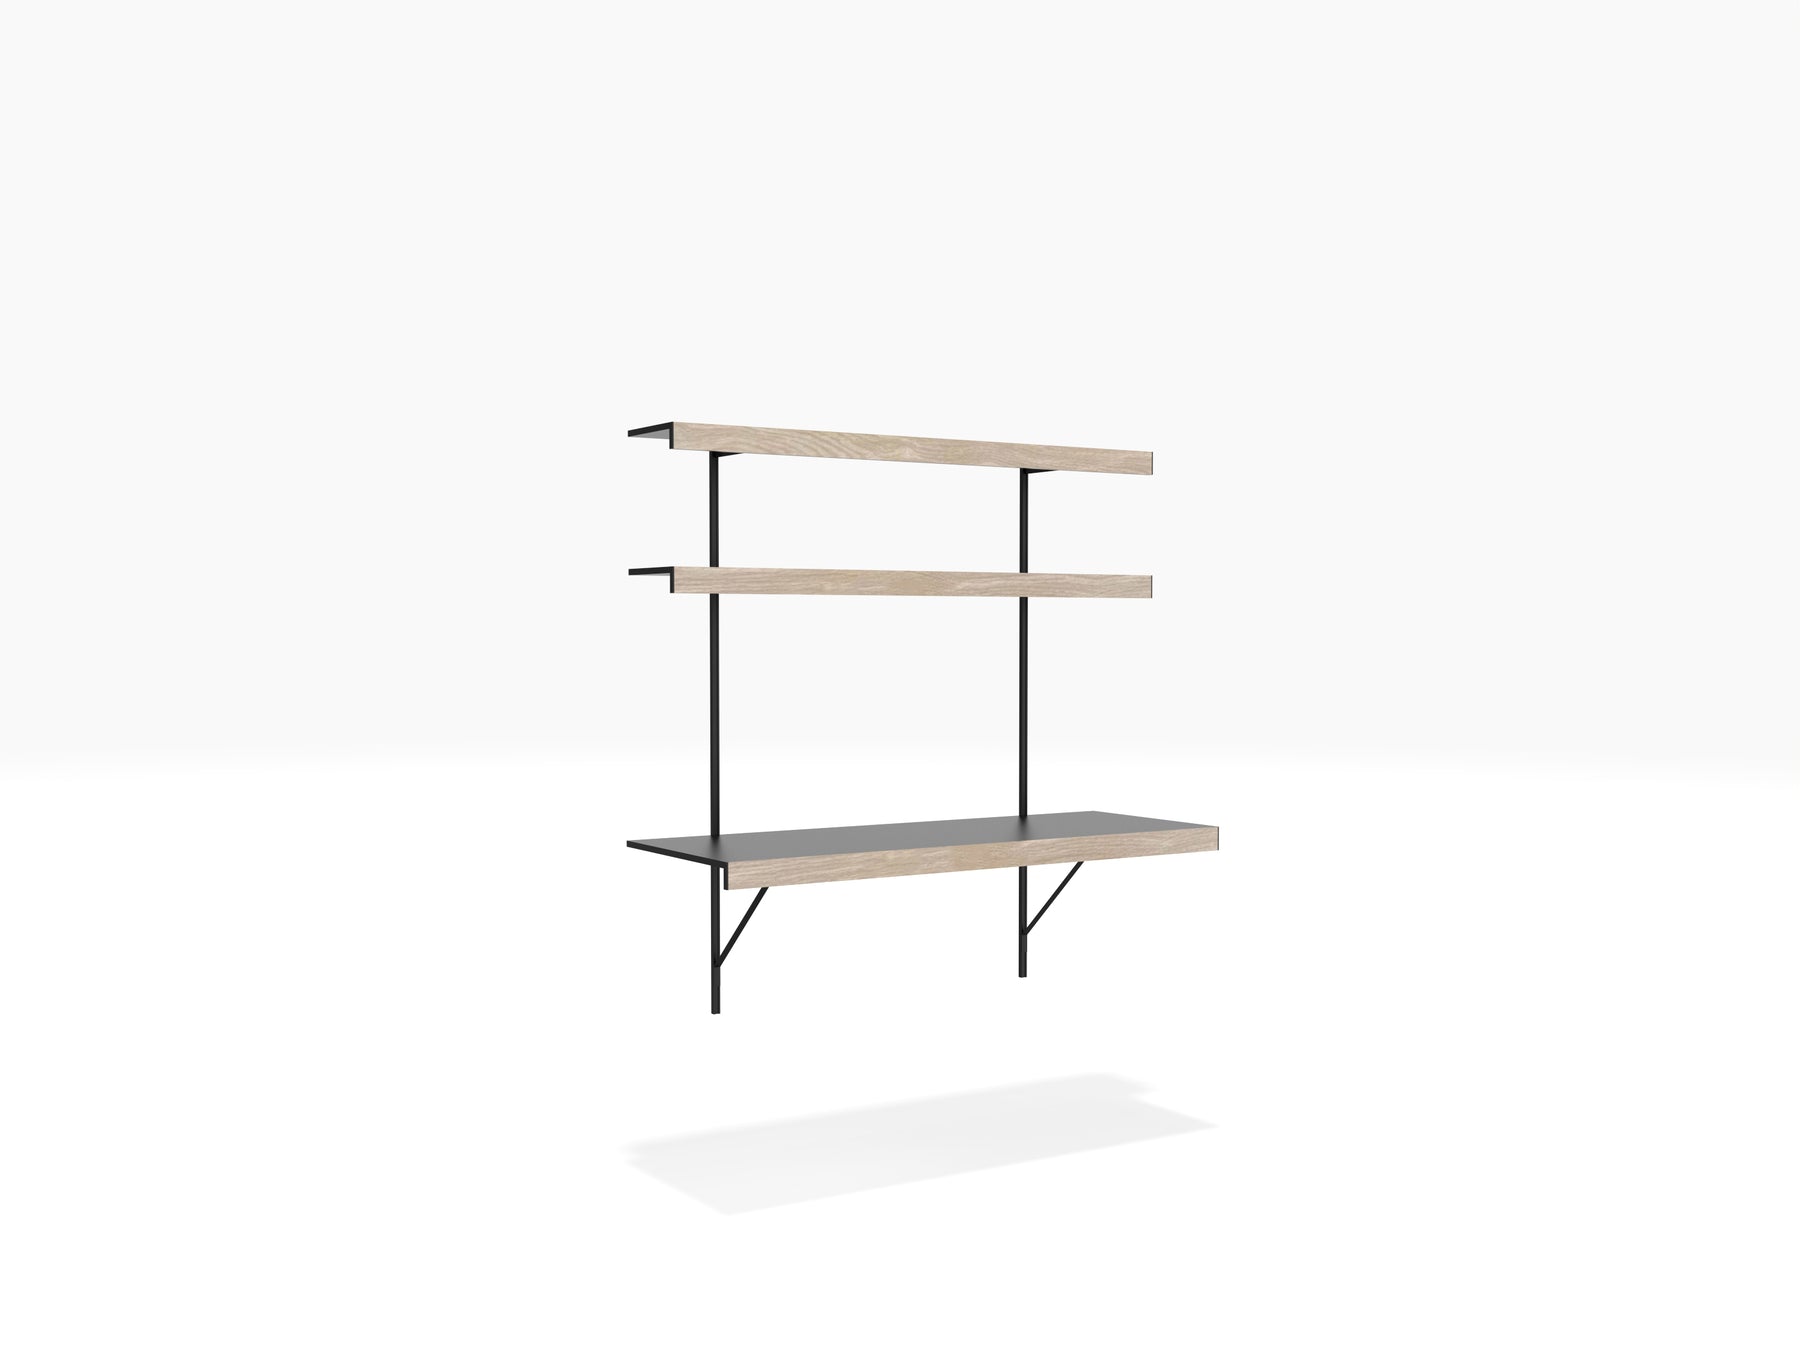 Modular shelving system with floating wall desk and shelves above in black & oak